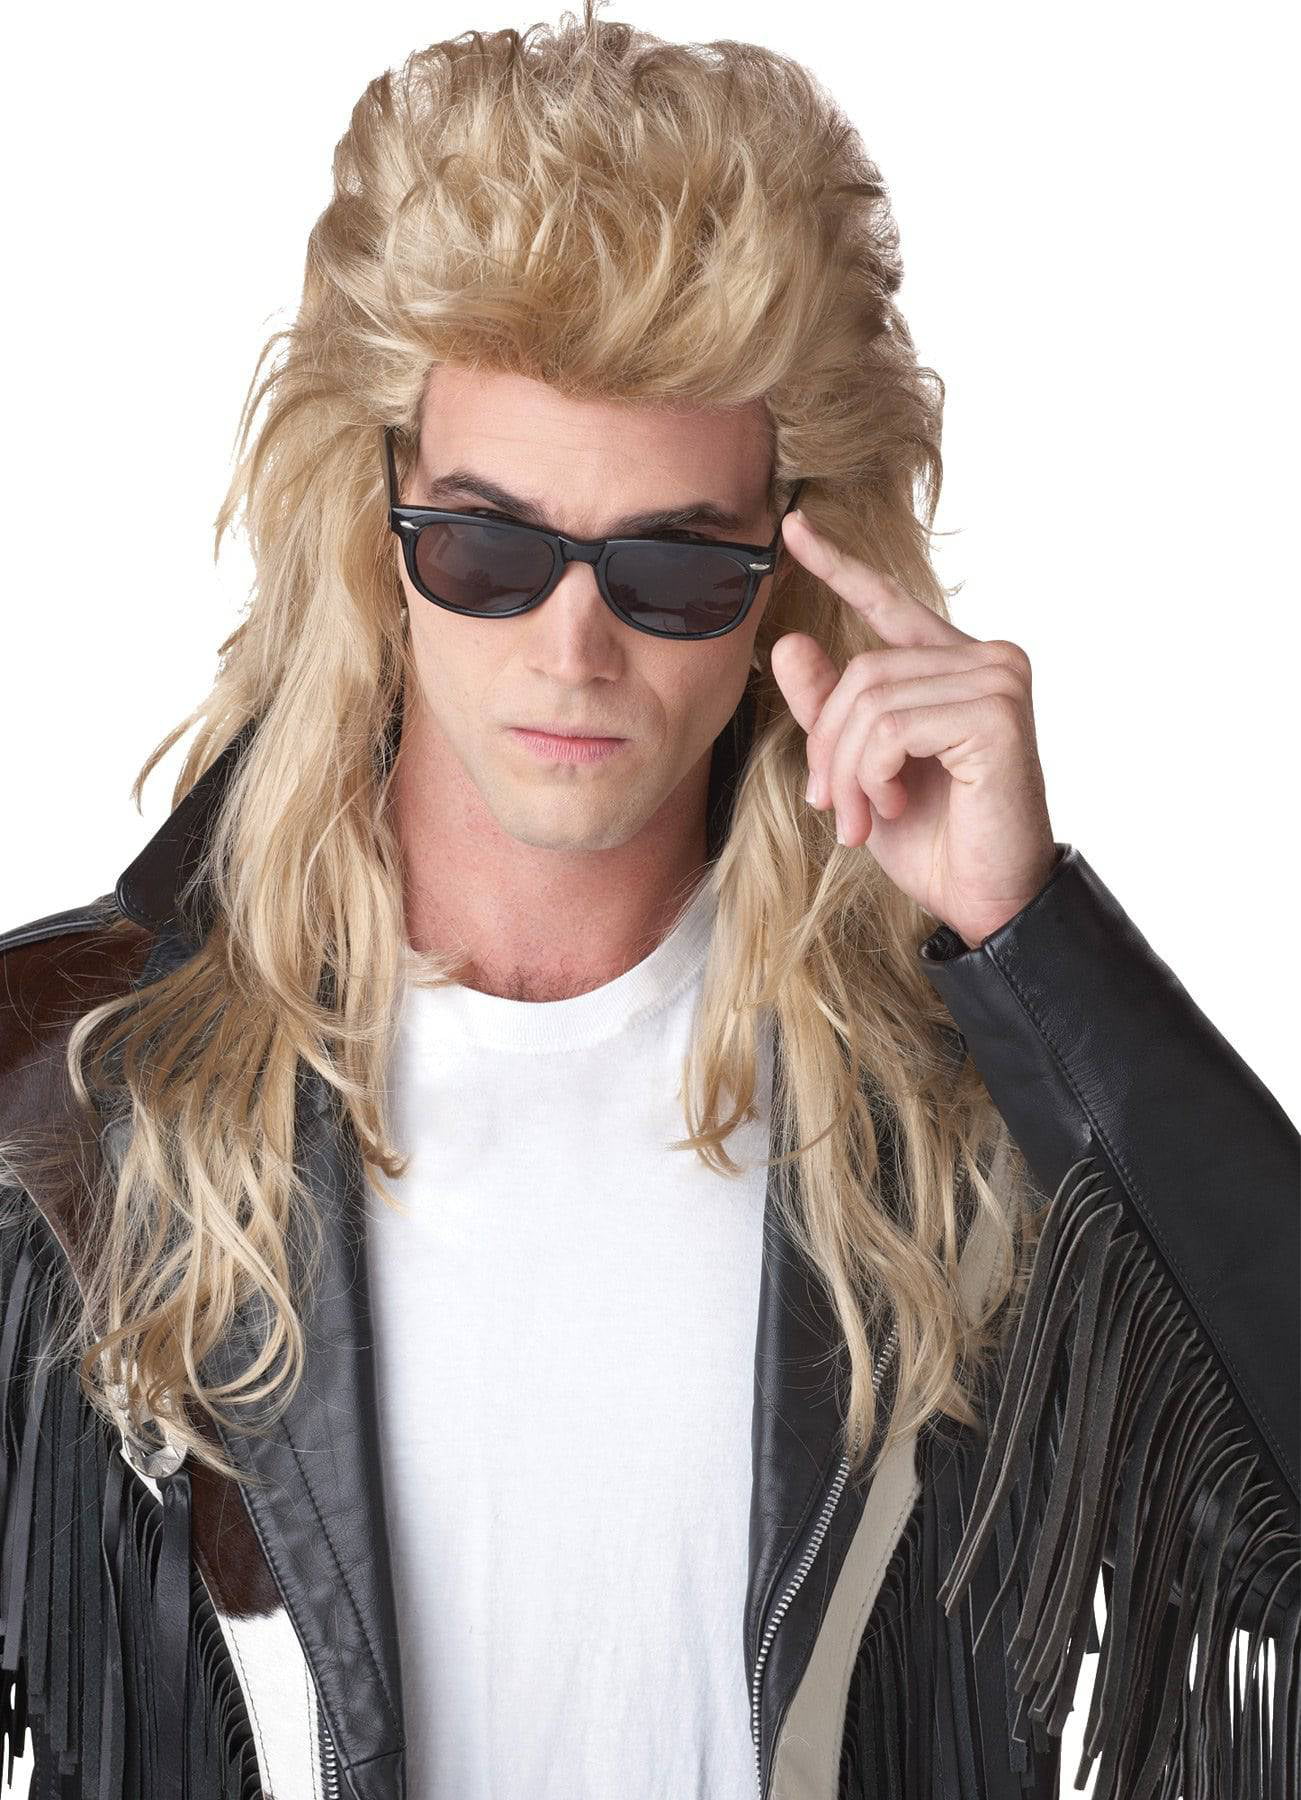 California Costumes Men's 80s Metal Rock Mullet Theme Party Wig, One Size -  Walmart.com